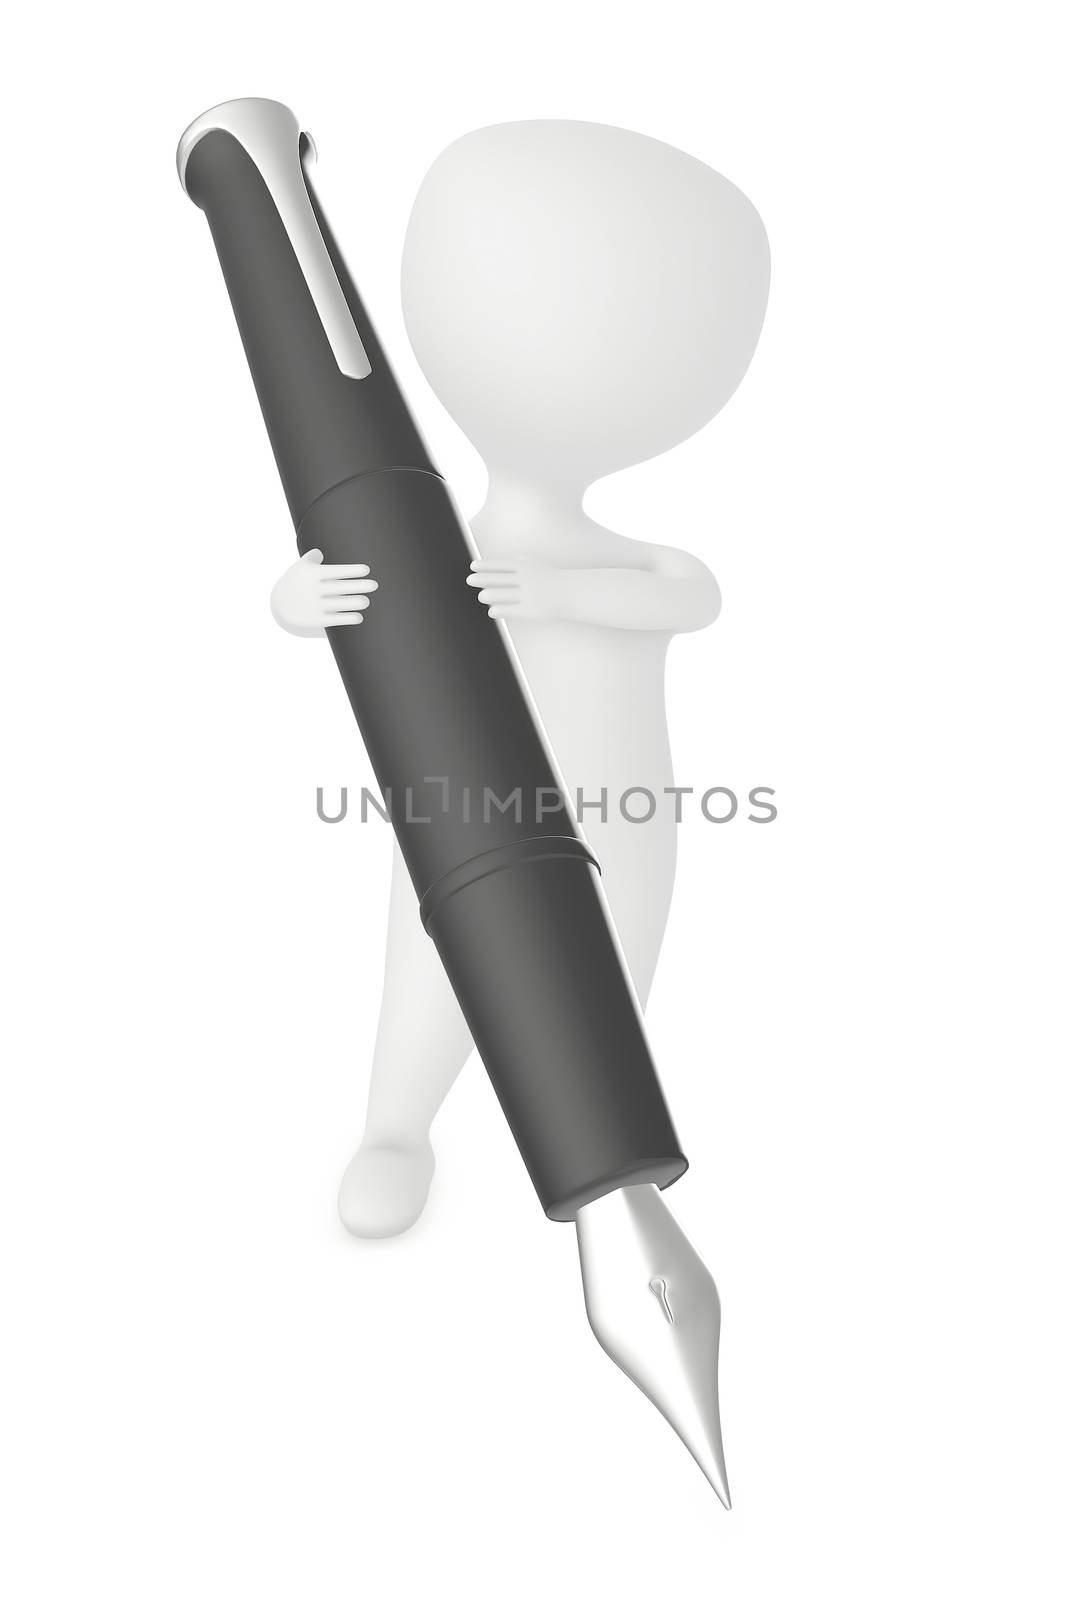 3d character ,holding a pen in white isolated background - 3d rendering